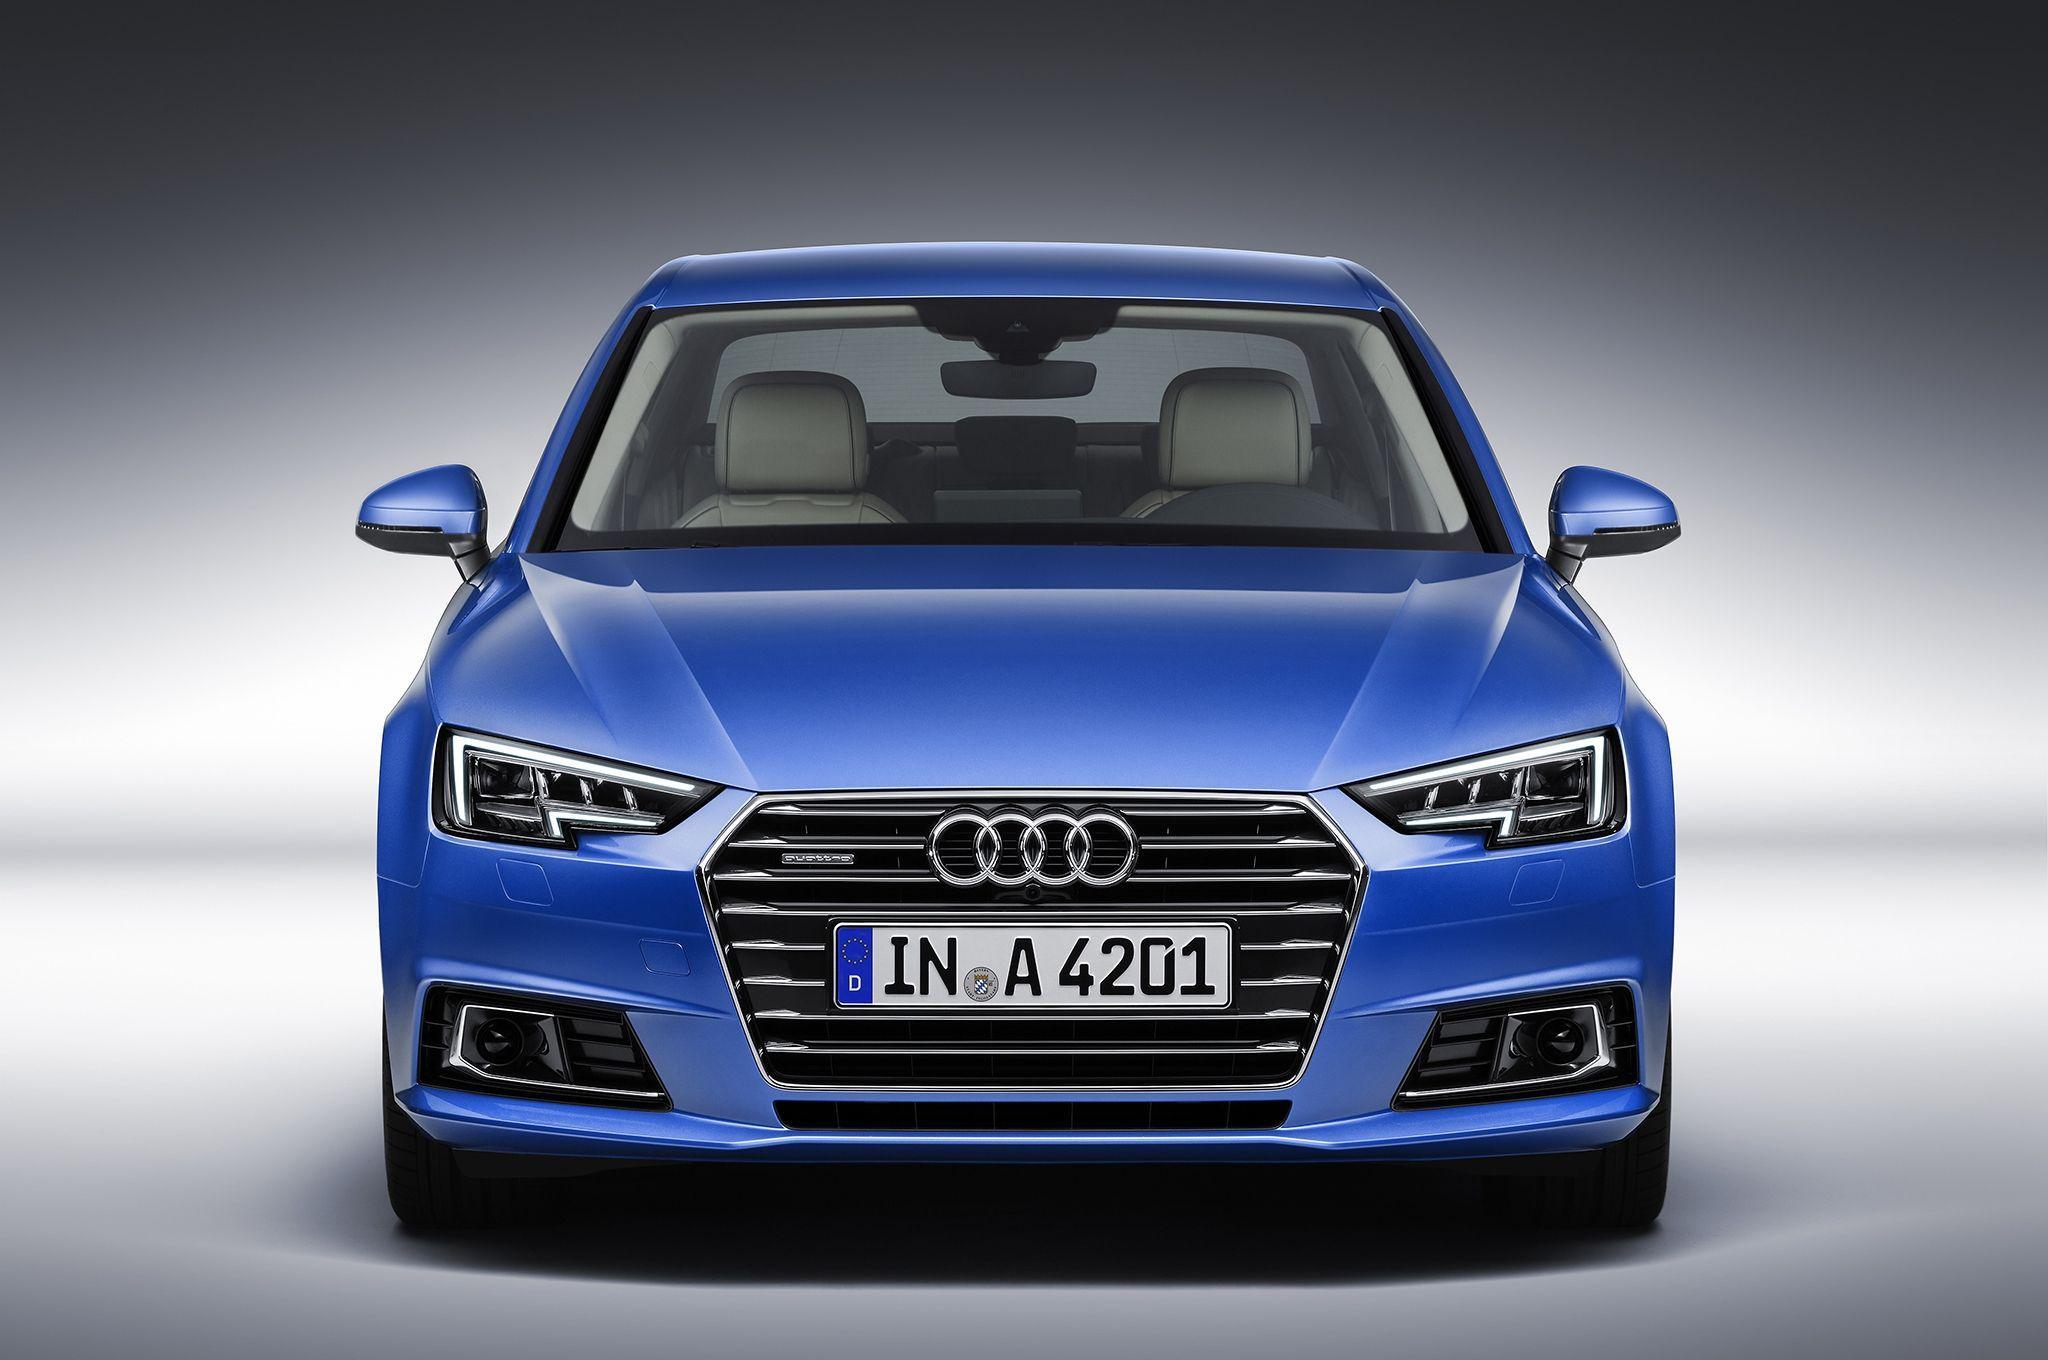 Audi A4 Hd Wallpapers For Mobile